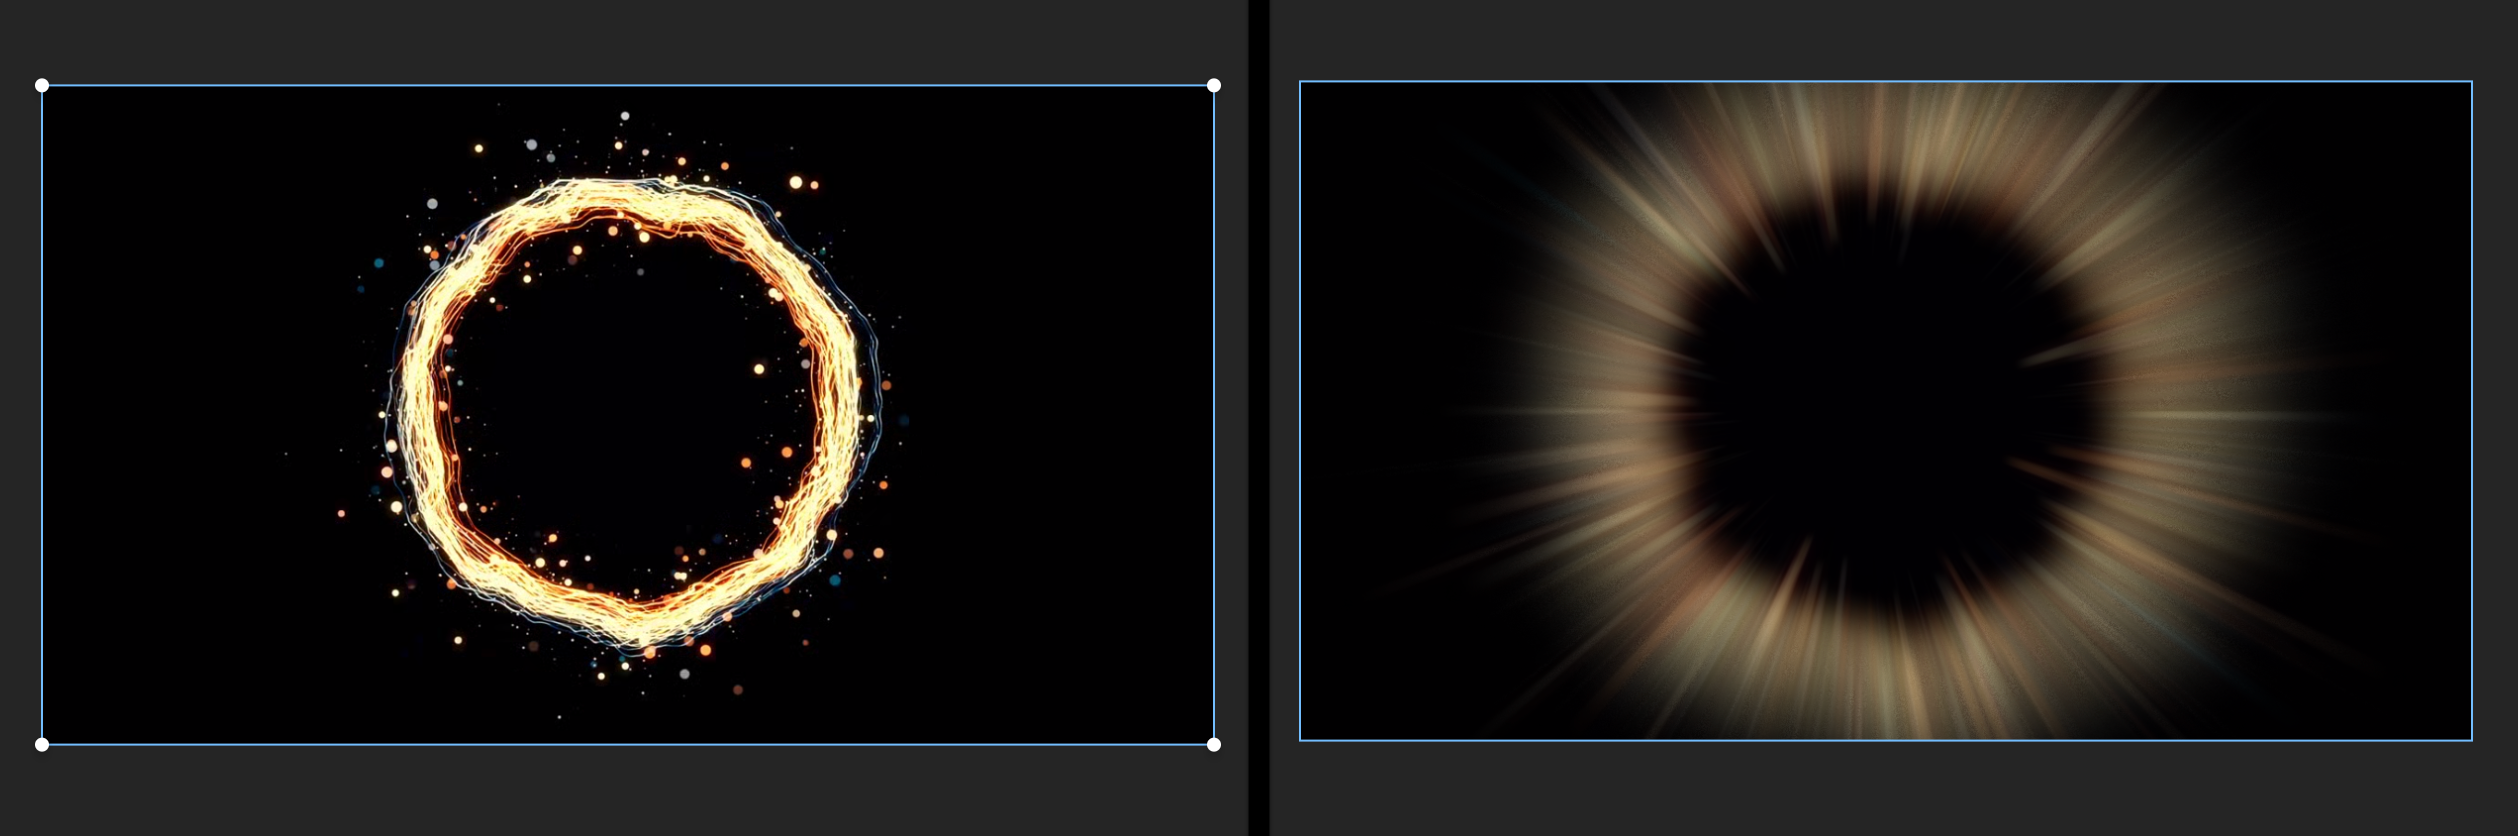 Screenshot of a light ring before and after applying the Zoom blur effect